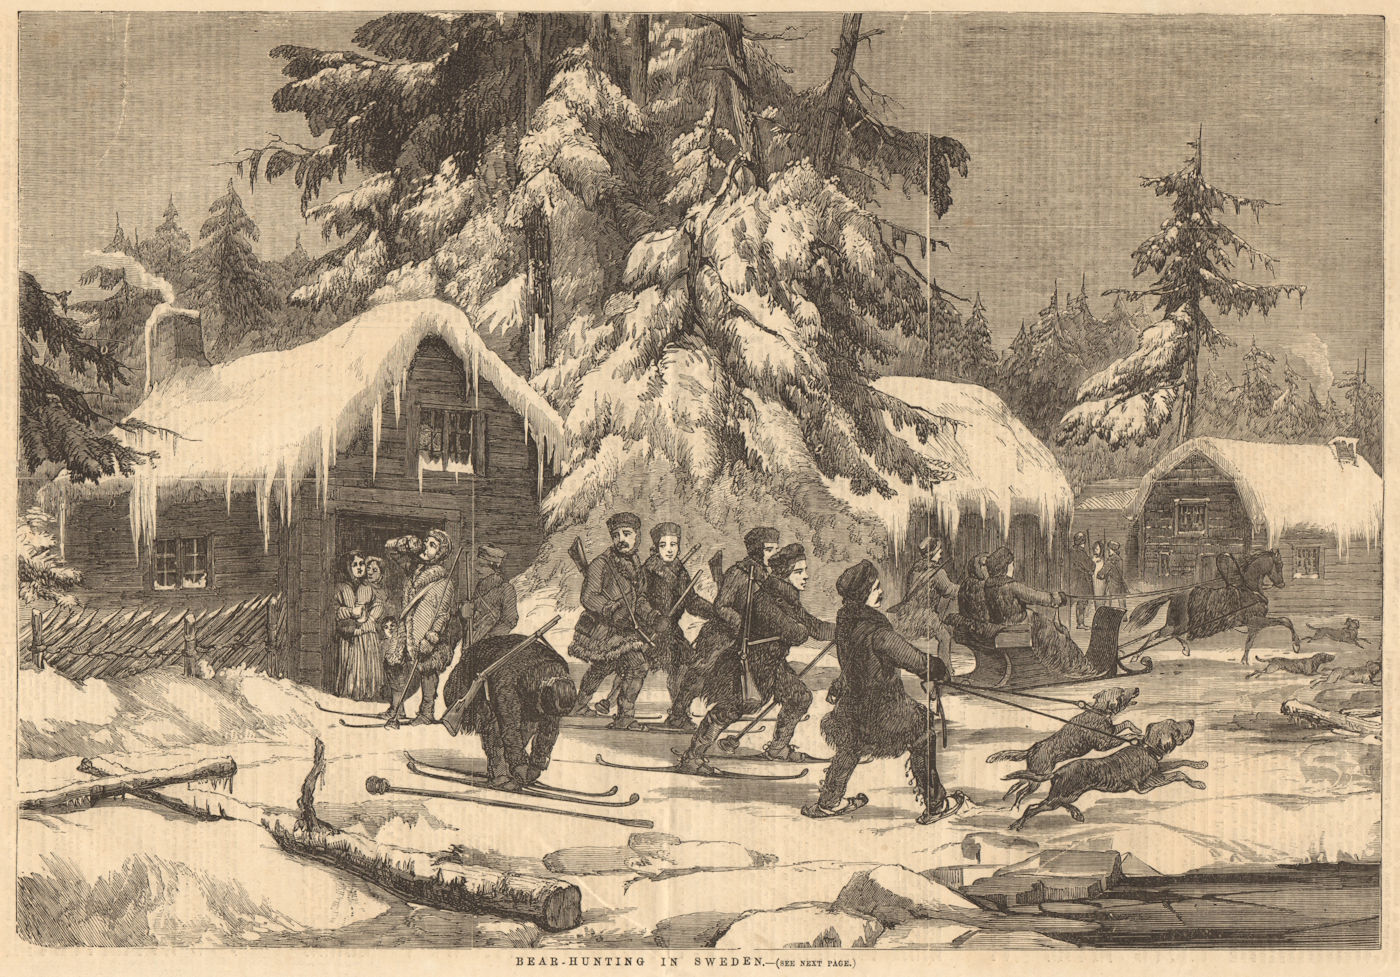 Bear hunting in Sweden on skis with sledges & dogs. Skiing 1856 old print